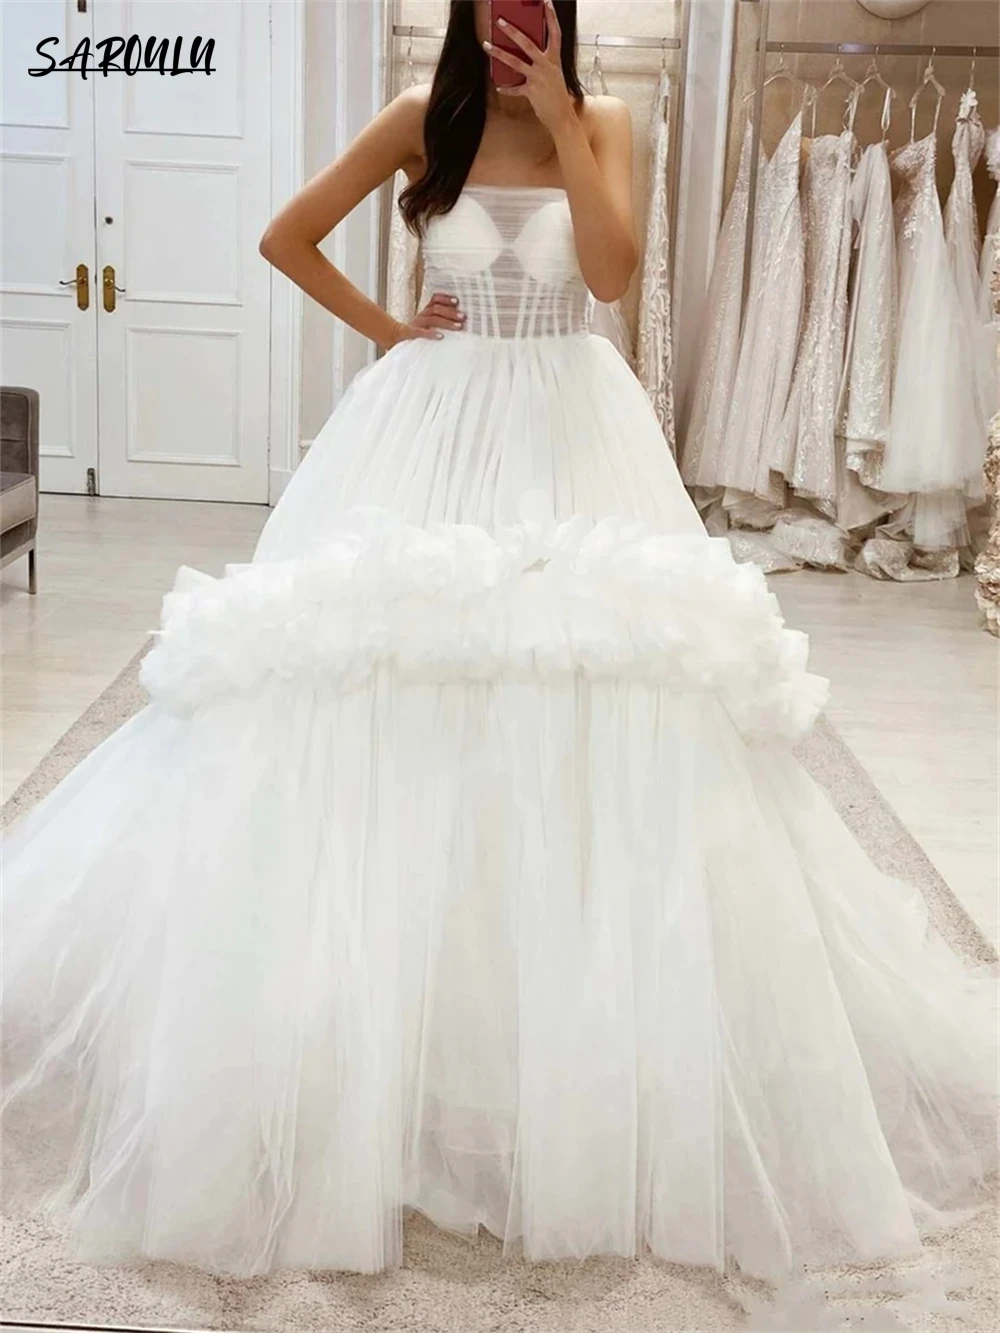 

White Tulle Long Wedding Dress Features Strapless Neckline A-line Tiered Skirt With Ruffles Bride Dresses Bridal Gown